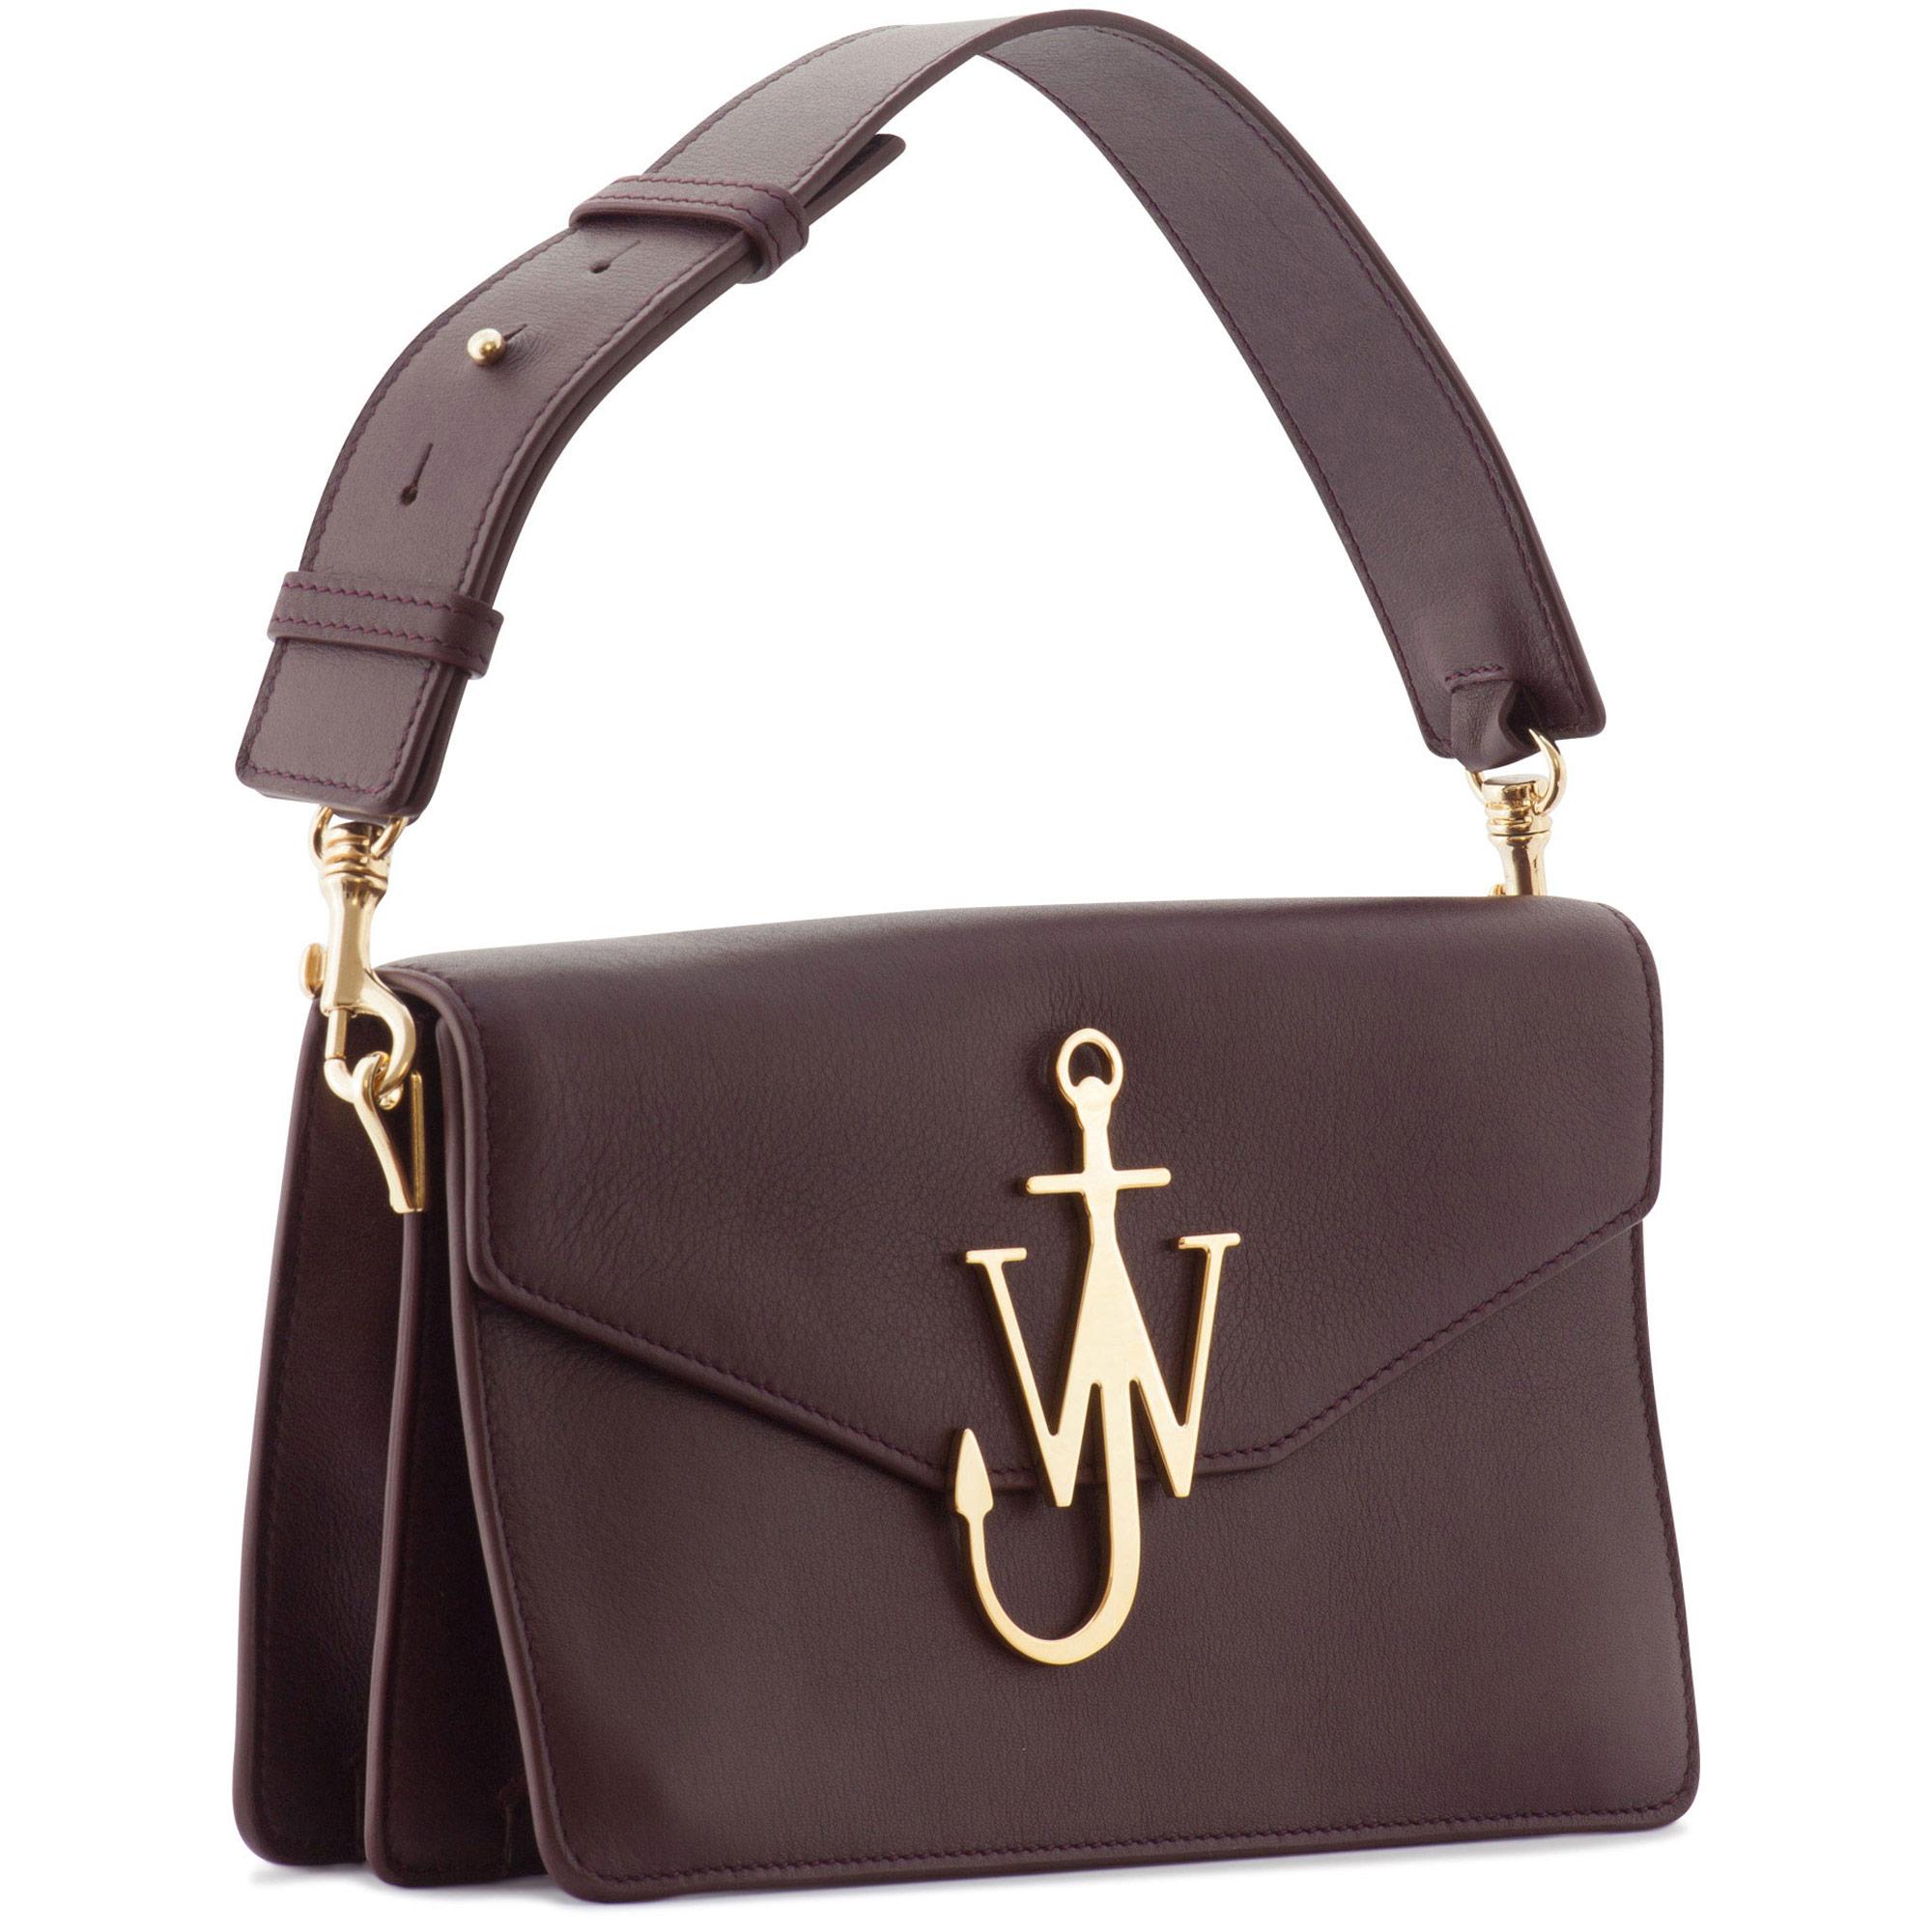 Download Lyst - J.W.Anderson Leather Bag With Logo